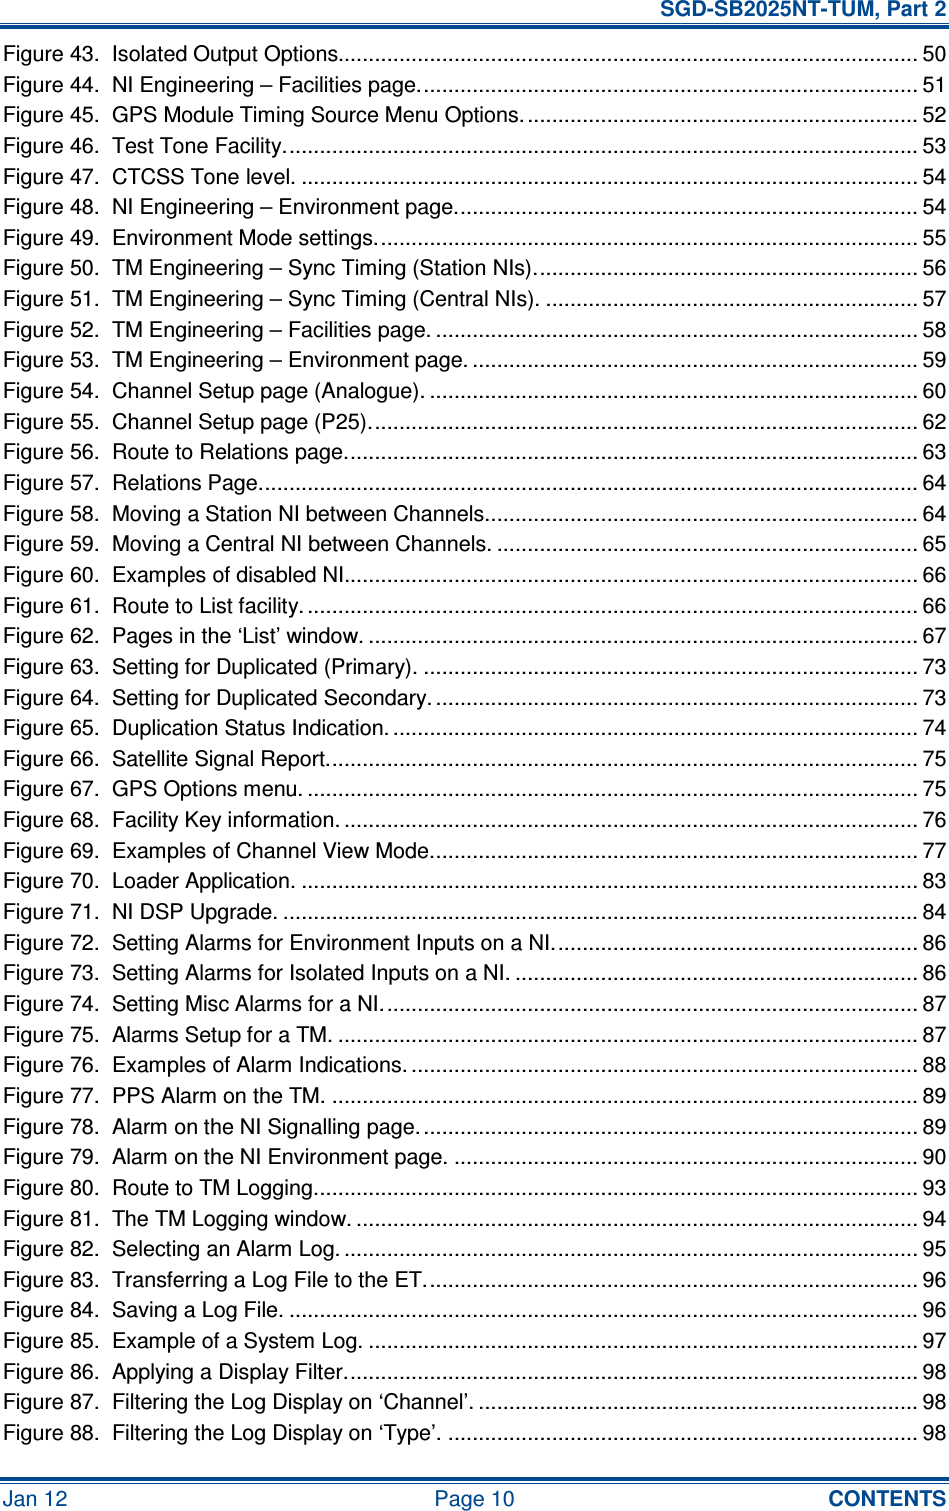   SGD-SB2025NT-TUM, Part 2 Jan 12  Page 10  CONTENTS Figure 43.  Isolated Output Options............................................................................................... 50 Figure 44.  NI Engineering – Facilities page.................................................................................. 51 Figure 45.  GPS Module Timing Source Menu Options................................................................. 52 Figure 46.  Test Tone Facility........................................................................................................ 53 Figure 47.  CTCSS Tone level. ..................................................................................................... 54 Figure 48.  NI Engineering – Environment page............................................................................ 54 Figure 49.  Environment Mode settings......................................................................................... 55 Figure 50.  TM Engineering – Sync Timing (Station NIs)............................................................... 56 Figure 51.  TM Engineering – Sync Timing (Central NIs). ............................................................. 57 Figure 52.  TM Engineering – Facilities page. ............................................................................... 58 Figure 53.  TM Engineering – Environment page. ......................................................................... 59 Figure 54.  Channel Setup page (Analogue). ................................................................................ 60 Figure 55.  Channel Setup page (P25).......................................................................................... 62 Figure 56.  Route to Relations page.............................................................................................. 63 Figure 57.  Relations Page............................................................................................................ 64 Figure 58.  Moving a Station NI between Channels....................................................................... 64 Figure 59.  Moving a Central NI between Channels. ..................................................................... 65 Figure 60.  Examples of disabled NI.............................................................................................. 66 Figure 61.  Route to List facility. .................................................................................................... 66 Figure 62.  Pages in the ‘List’ window. .......................................................................................... 67 Figure 63.  Setting for Duplicated (Primary). ................................................................................. 73 Figure 64.  Setting for Duplicated Secondary. ............................................................................... 73 Figure 65.  Duplication Status Indication. ...................................................................................... 74 Figure 66.  Satellite Signal Report................................................................................................. 75 Figure 67.  GPS Options menu. .................................................................................................... 75 Figure 68.  Facility Key information. .............................................................................................. 76 Figure 69.  Examples of Channel View Mode................................................................................ 77 Figure 70.  Loader Application. ..................................................................................................... 83 Figure 71.  NI DSP Upgrade. ........................................................................................................ 84 Figure 72.  Setting Alarms for Environment Inputs on a NI............................................................ 86 Figure 73.  Setting Alarms for Isolated Inputs on a NI. .................................................................. 86 Figure 74.  Setting Misc Alarms for a NI........................................................................................ 87 Figure 75.  Alarms Setup for a TM. ............................................................................................... 87 Figure 76.  Examples of Alarm Indications. ................................................................................... 88 Figure 77.  PPS Alarm on the TM. ................................................................................................ 89 Figure 78.  Alarm on the NI Signalling page.................................................................................. 89 Figure 79.  Alarm on the NI Environment page. ............................................................................ 90 Figure 80.  Route to TM Logging................................................................................................... 93 Figure 81.  The TM Logging window. ............................................................................................ 94 Figure 82.  Selecting an Alarm Log. .............................................................................................. 95 Figure 83.  Transferring a Log File to the ET................................................................................. 96 Figure 84.  Saving a Log File. ....................................................................................................... 96 Figure 85.  Example of a System Log. .......................................................................................... 97 Figure 86.  Applying a Display Filter.............................................................................................. 98 Figure 87.  Filtering the Log Display on ‘Channel’. ........................................................................ 98 Figure 88.  Filtering the Log Display on ‘Type’. ............................................................................. 98 